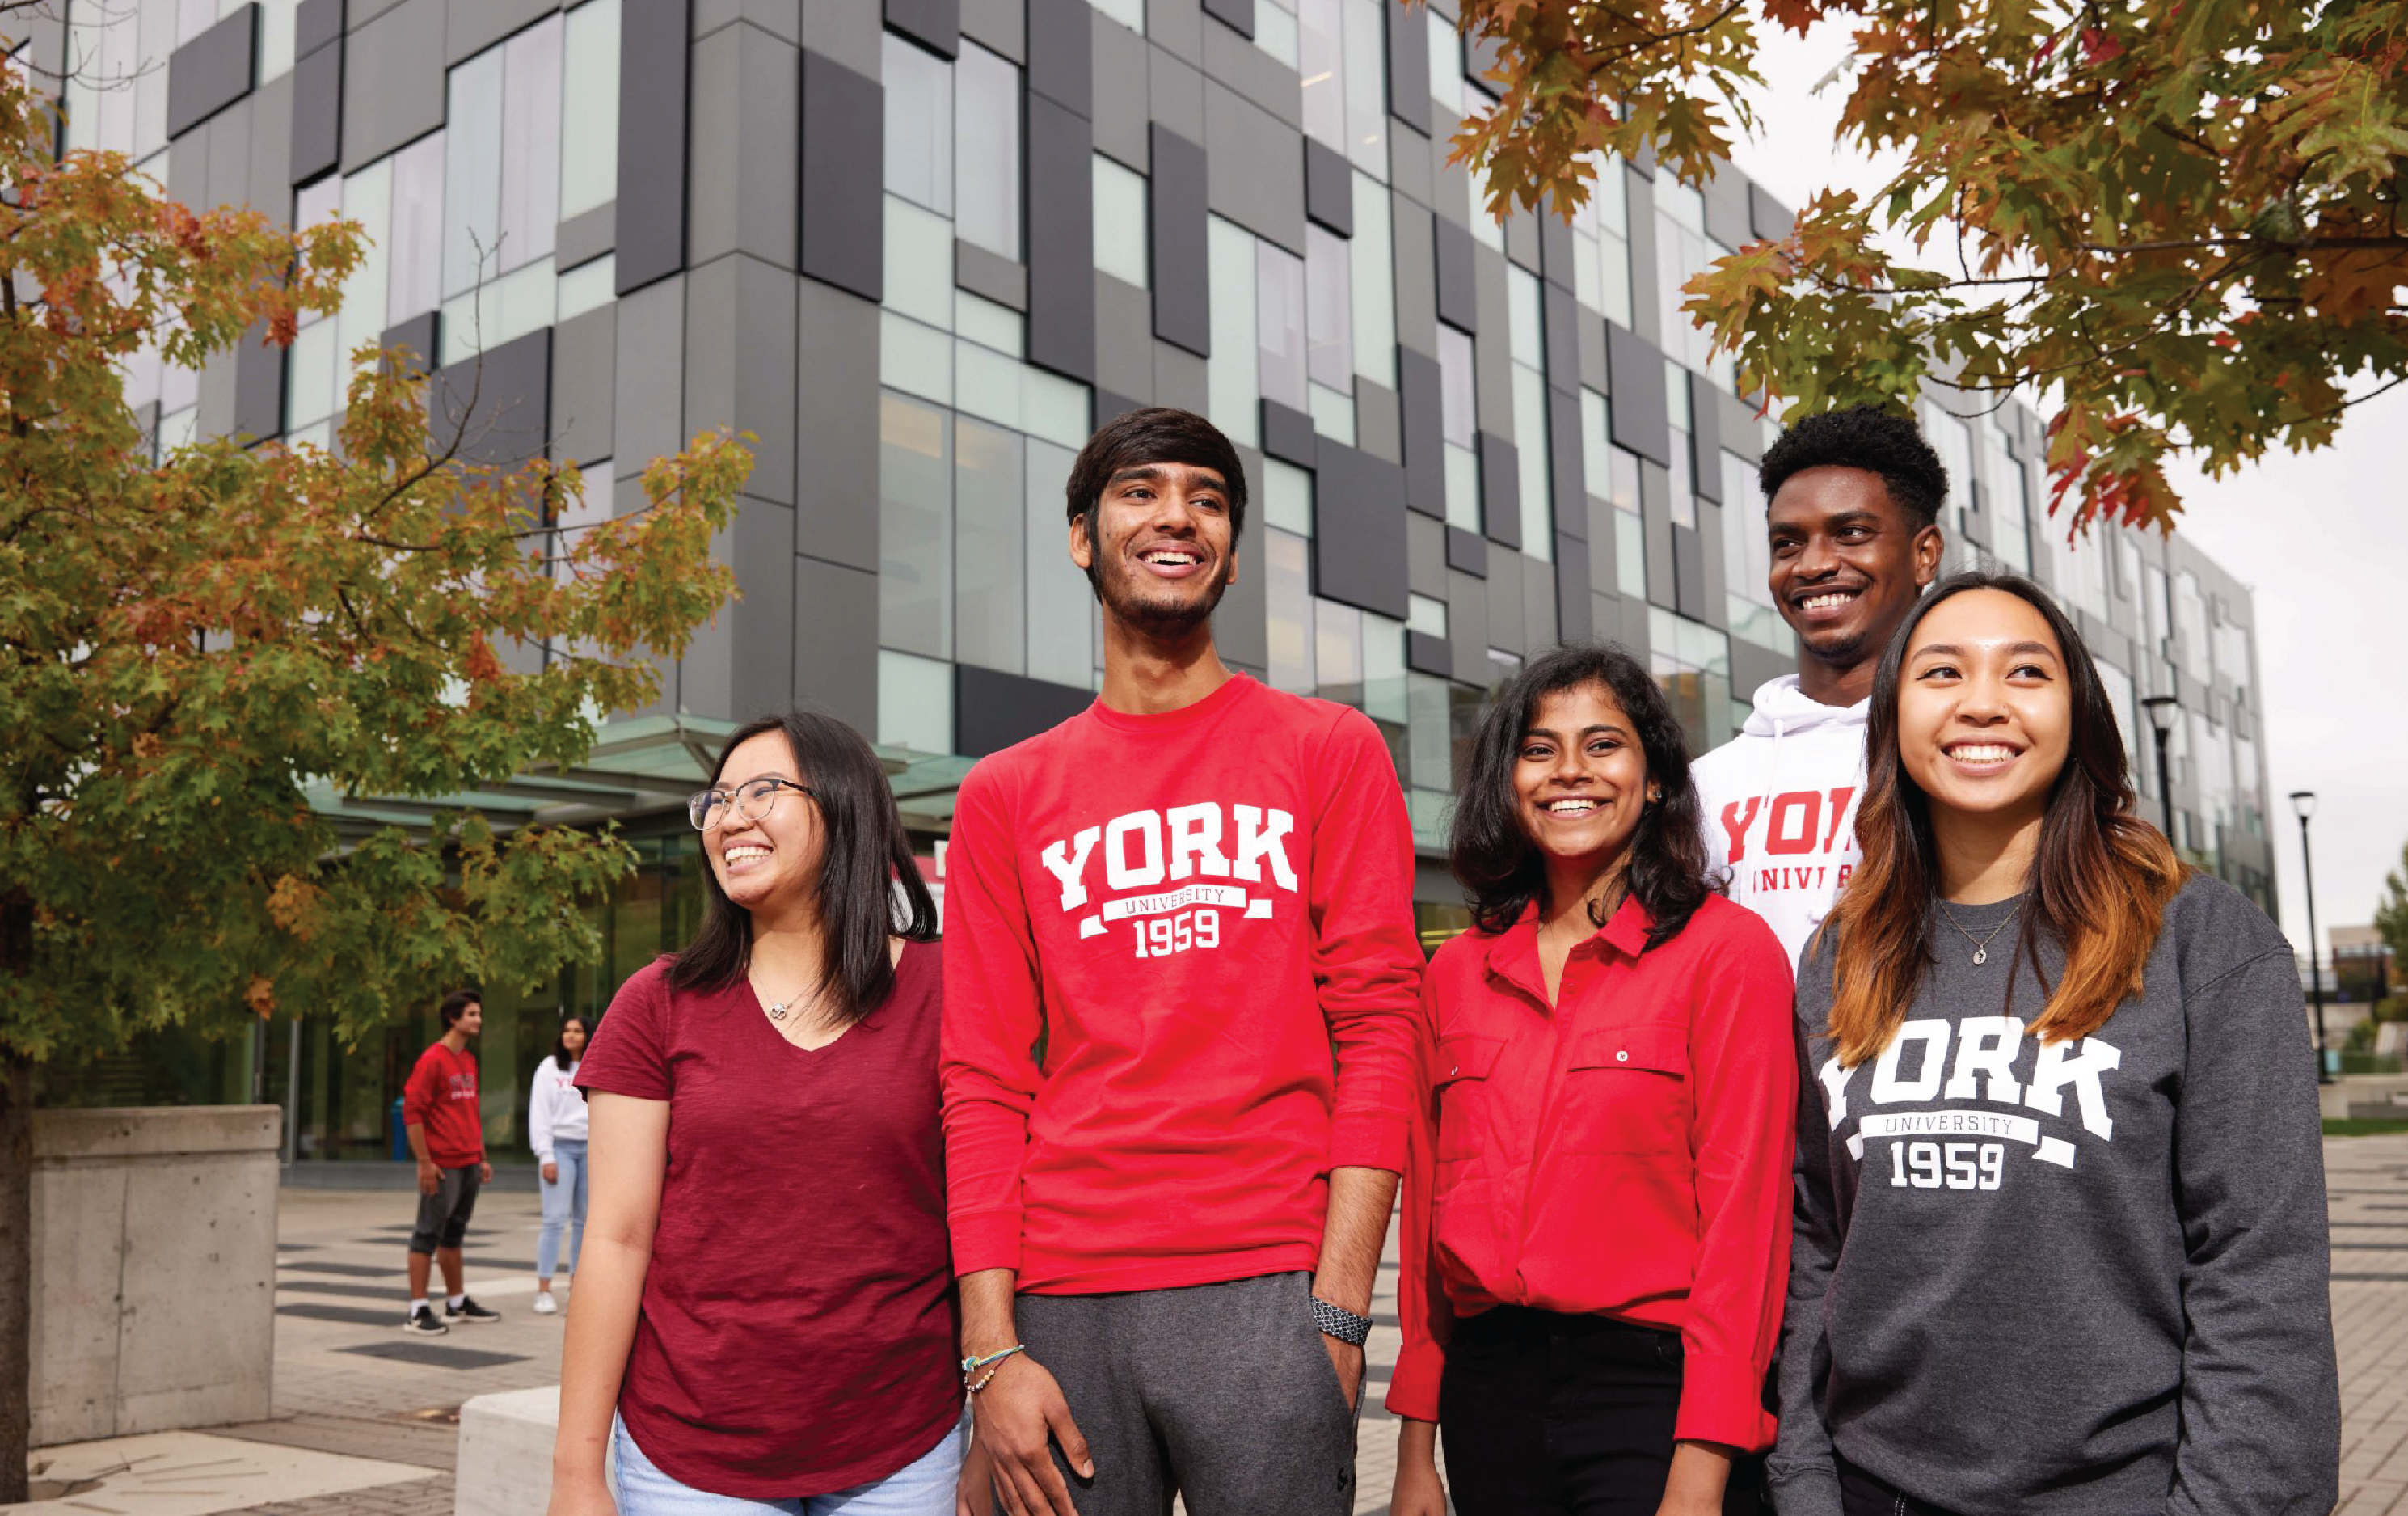 We look forward to welcoming Indian students VC York University Canada